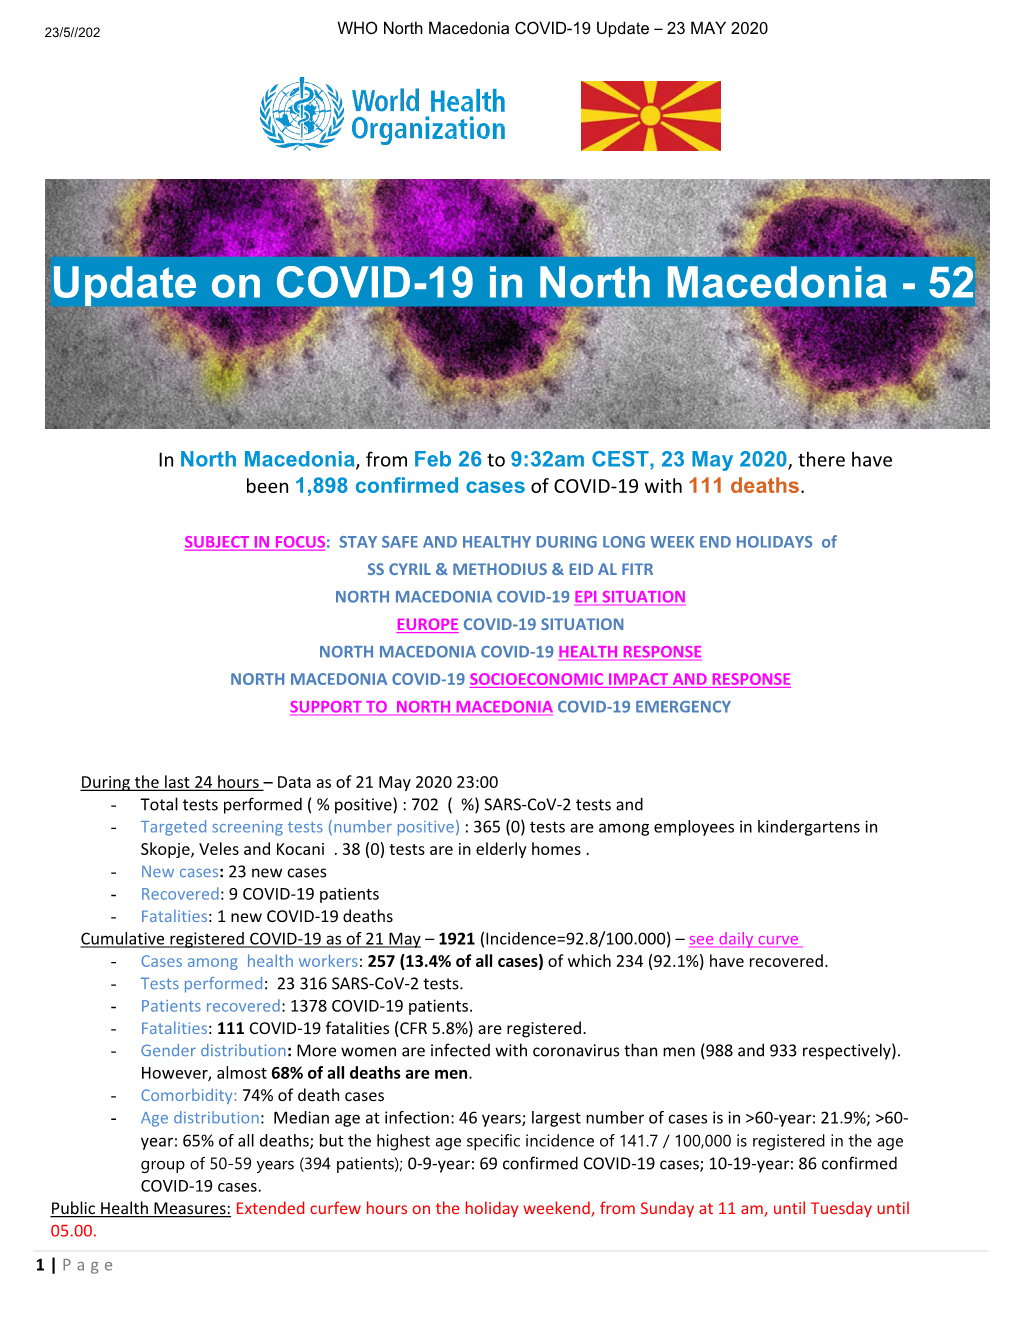 Update on COVID-19 in North Macedonia - 52